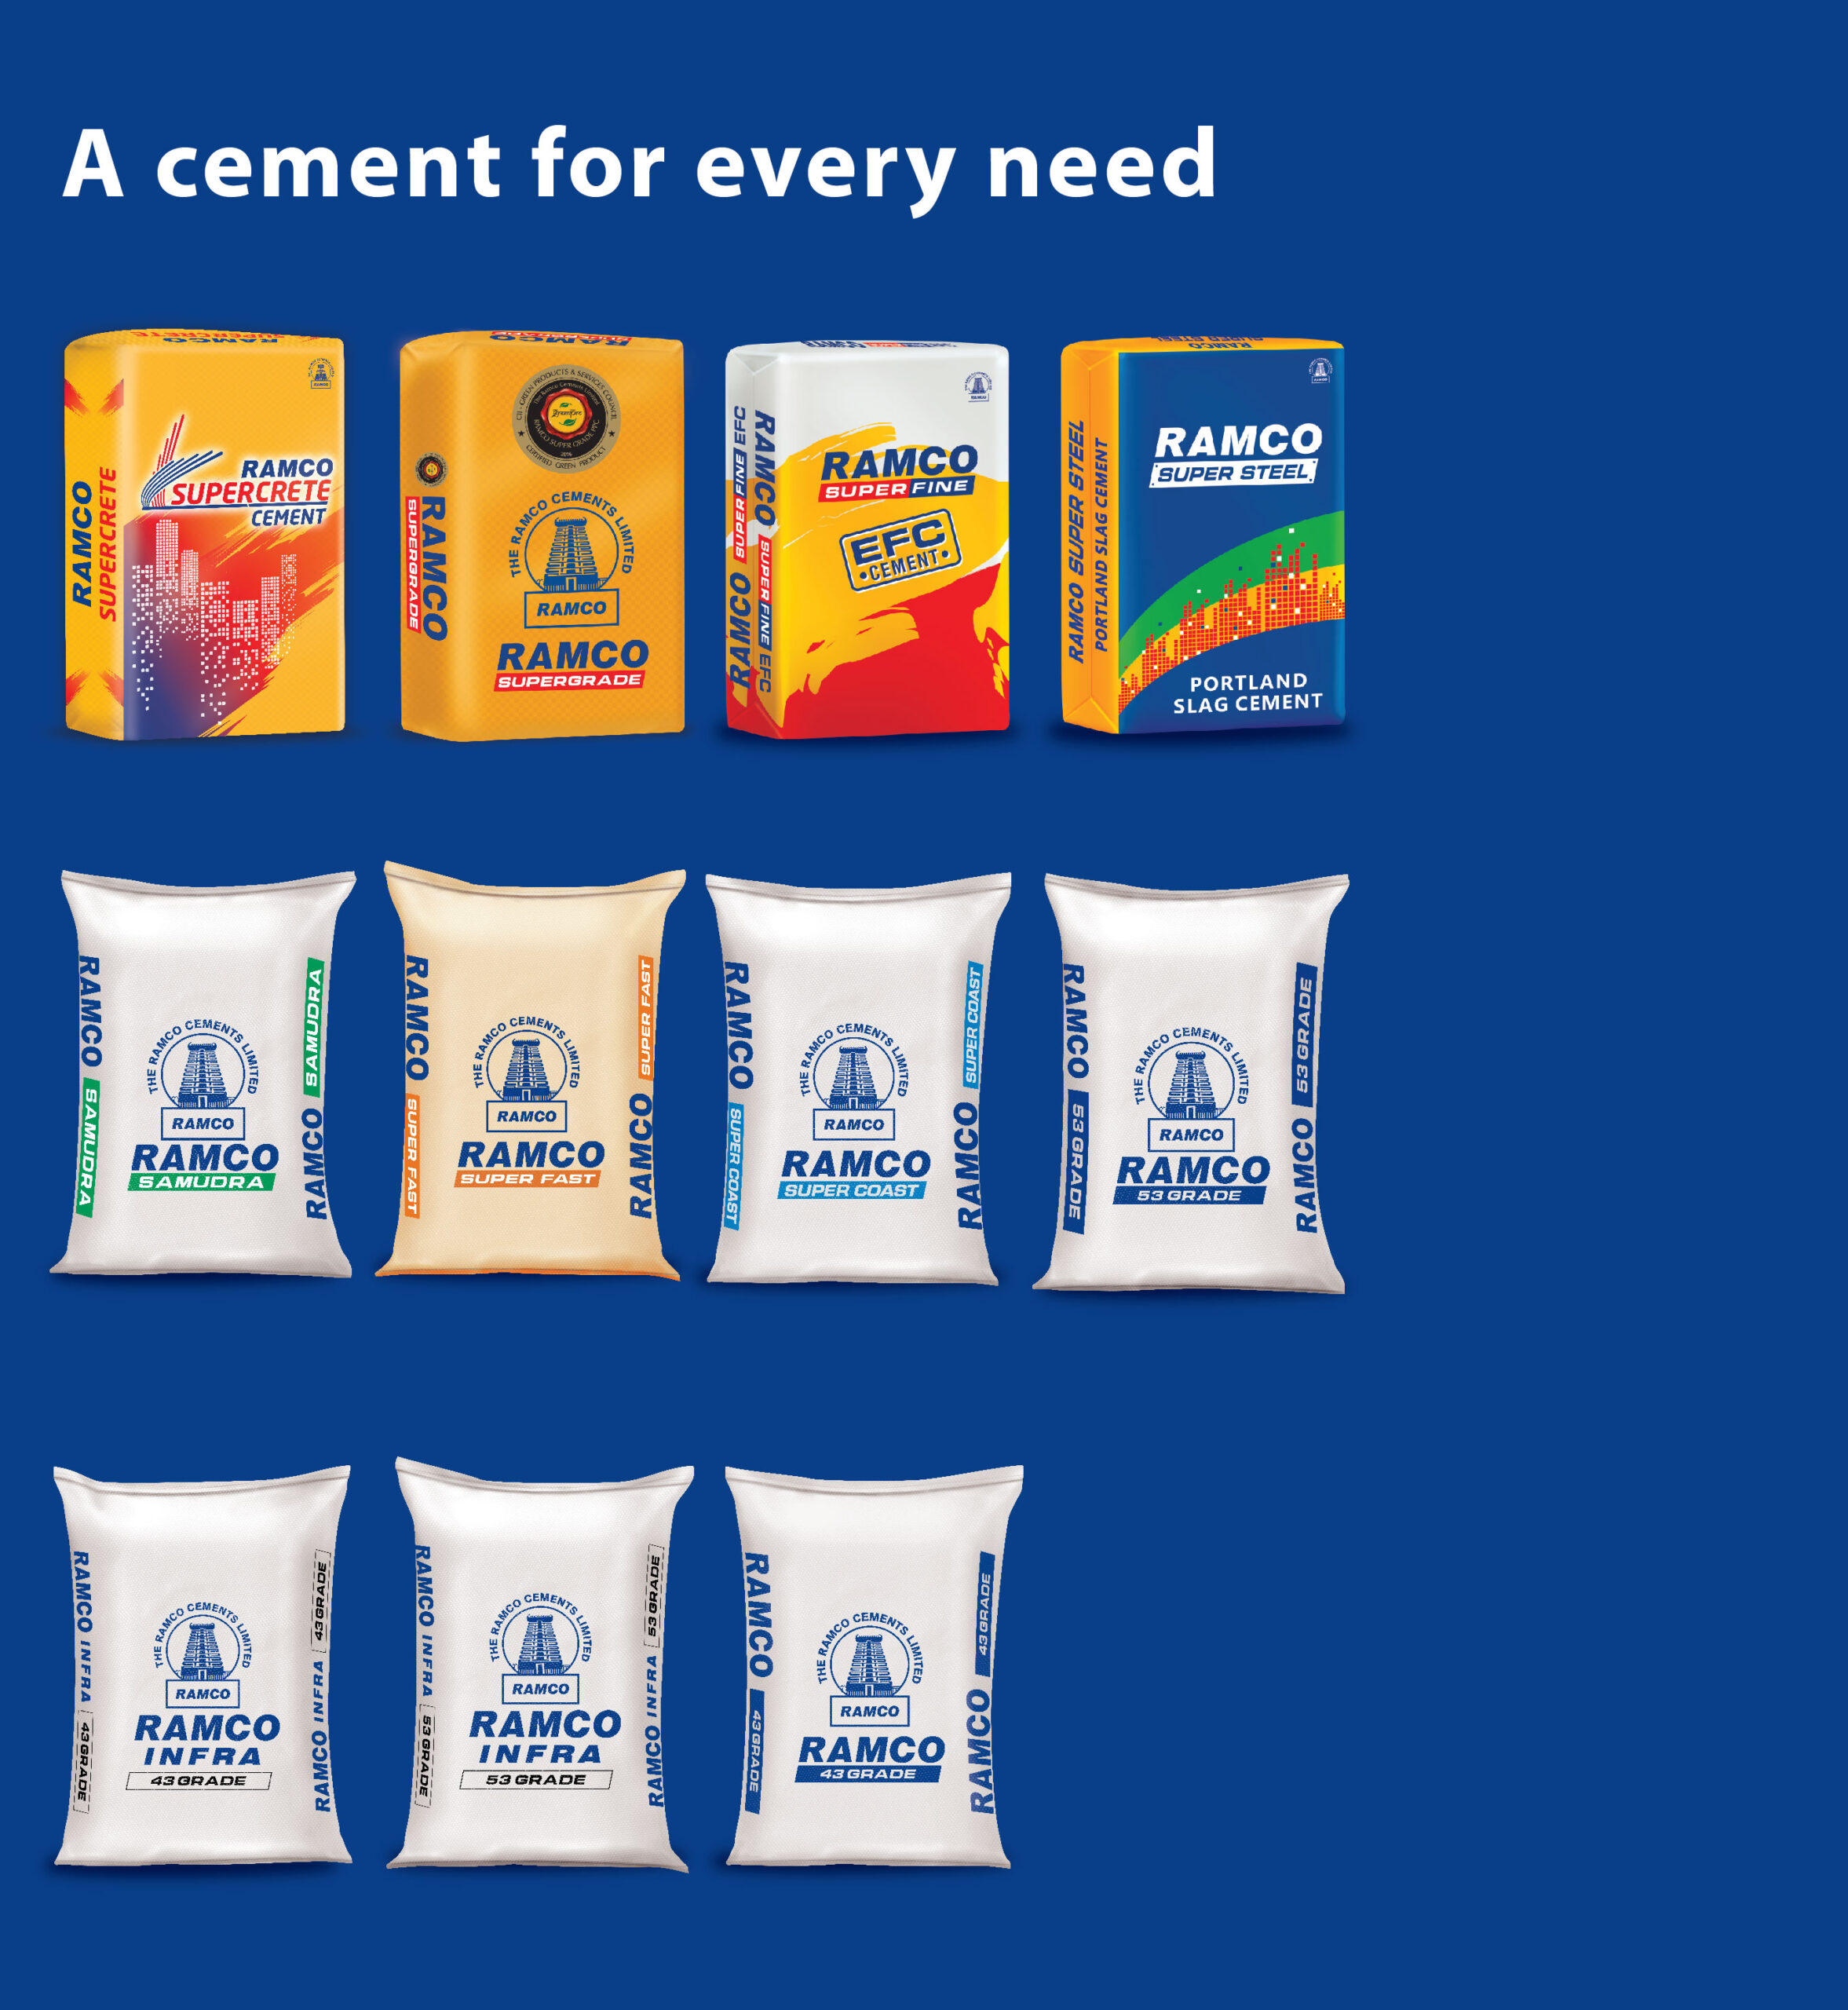 Ramco Cements announces Rs 1,250 crore investment to double Kalavatala plant capacity, reinforcing growth and sustainability.